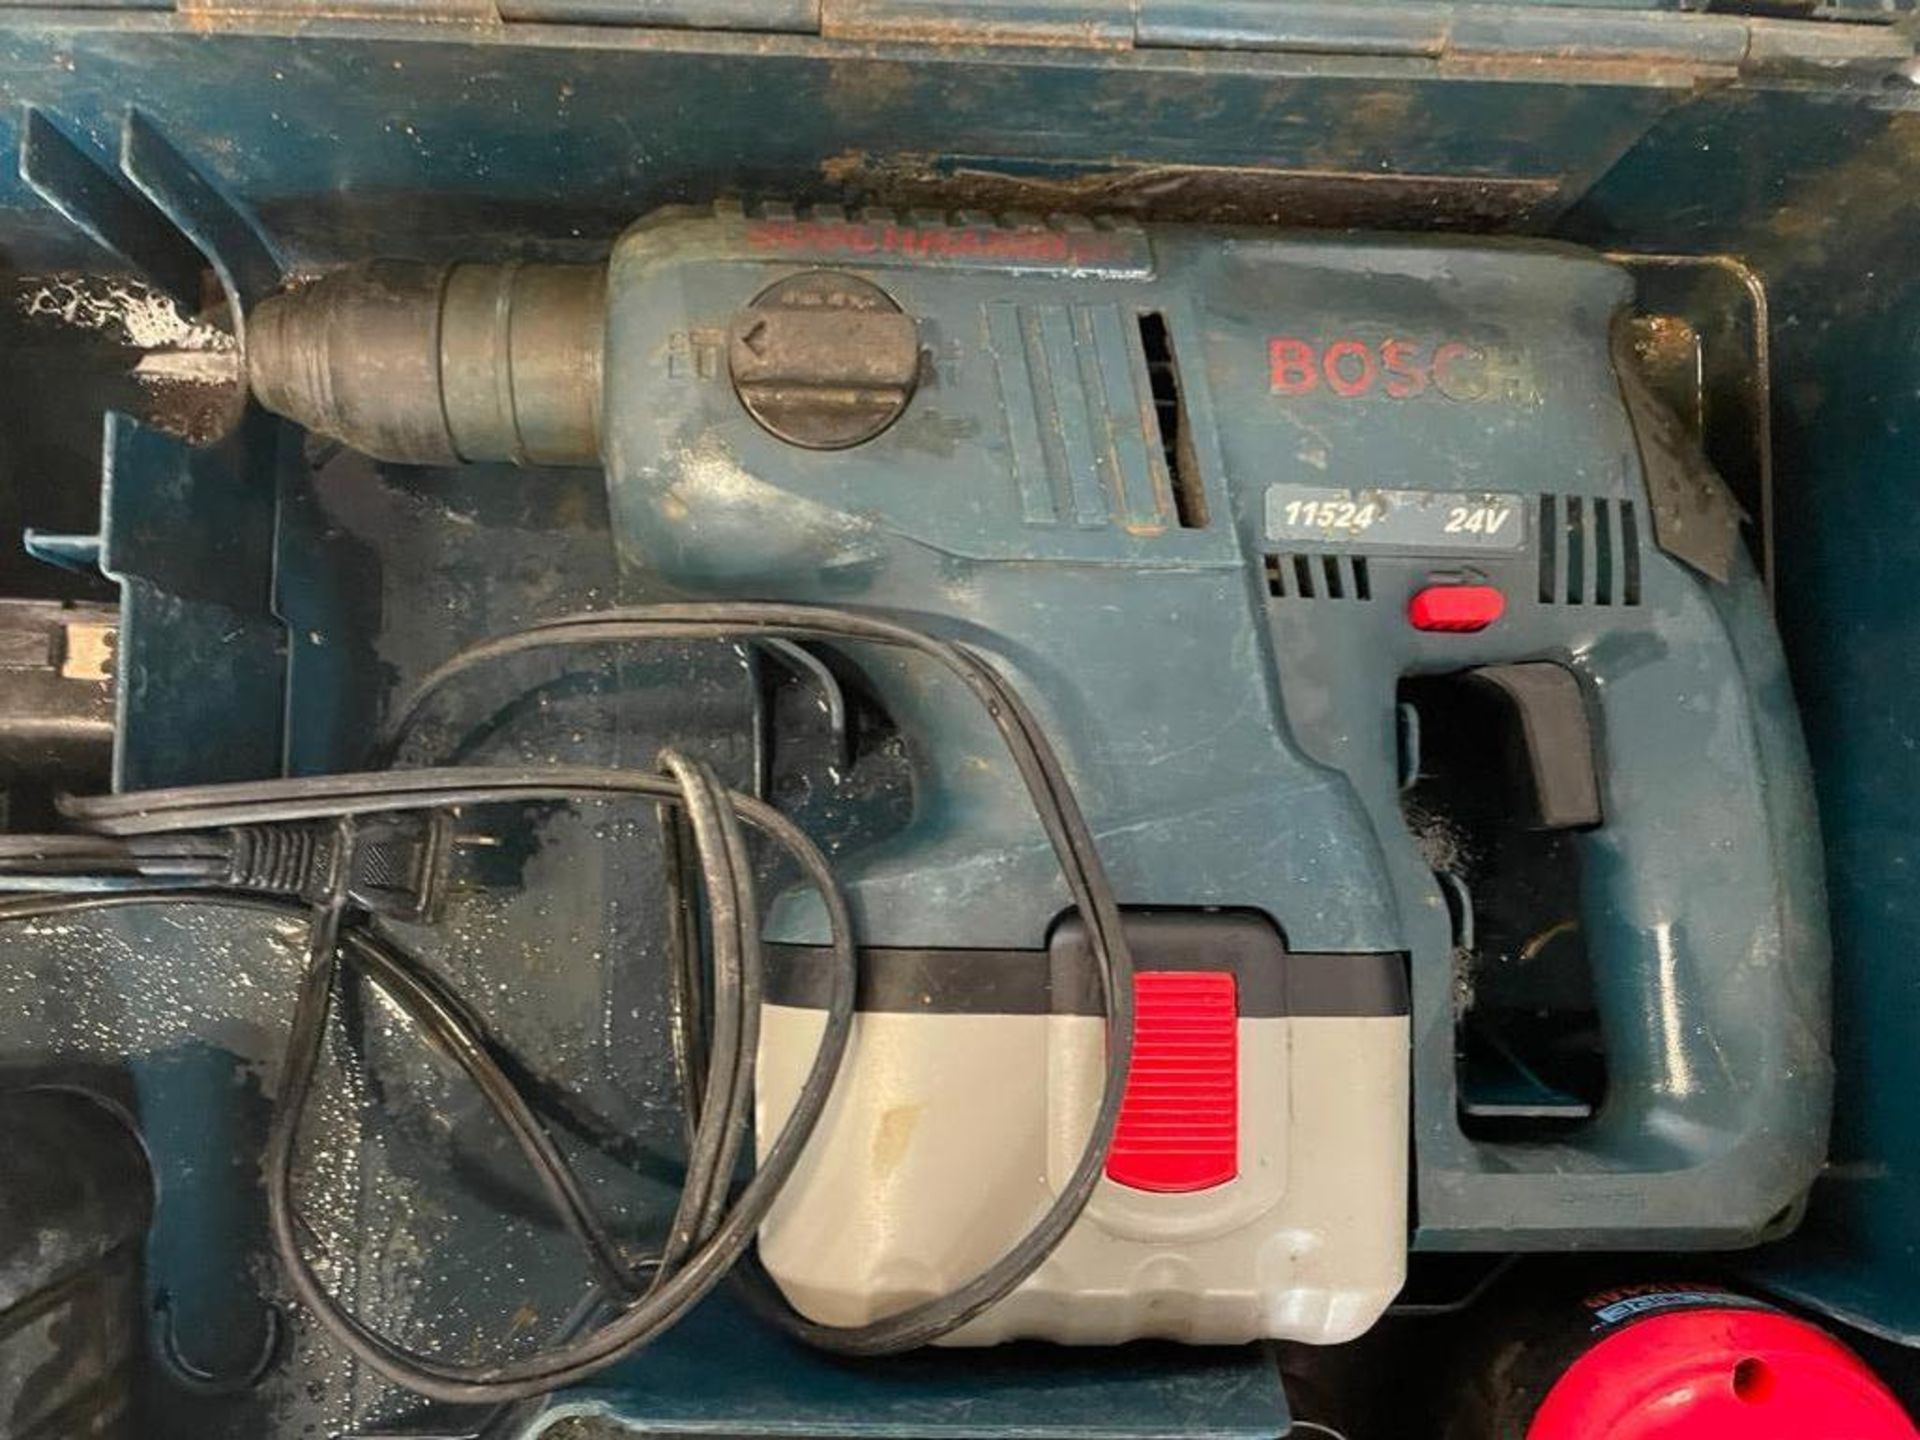 Bosch 11524 Rotary Hammer, 24V. Located in Hazelwood, MO - Image 3 of 9